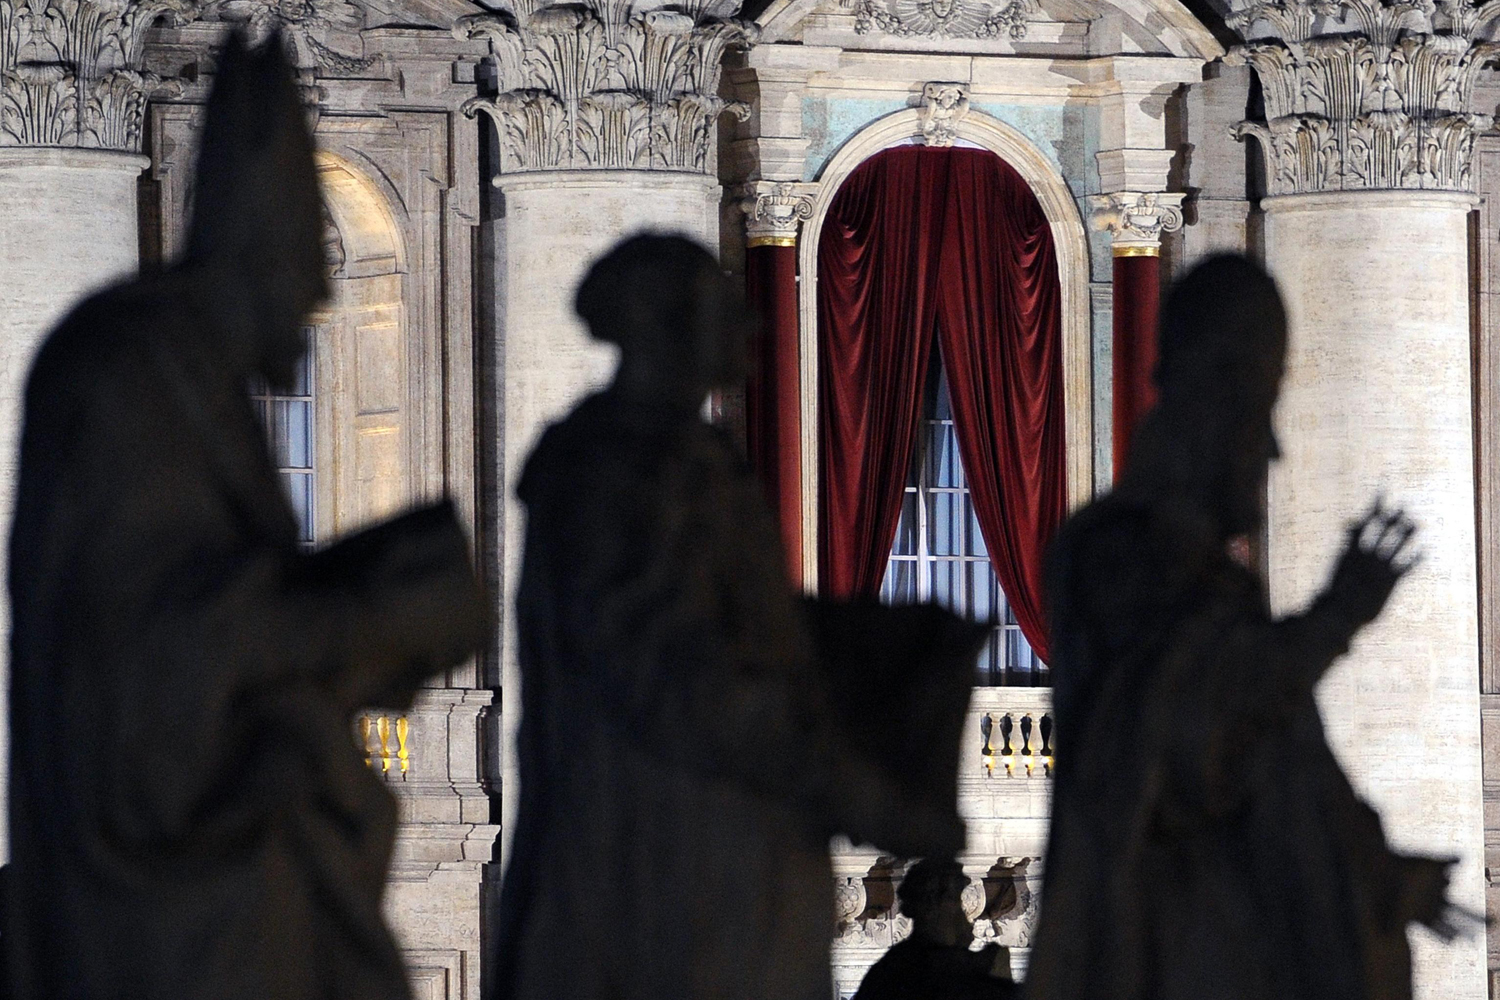 VATICAN CONCLAVE 2013: FIRST DAY